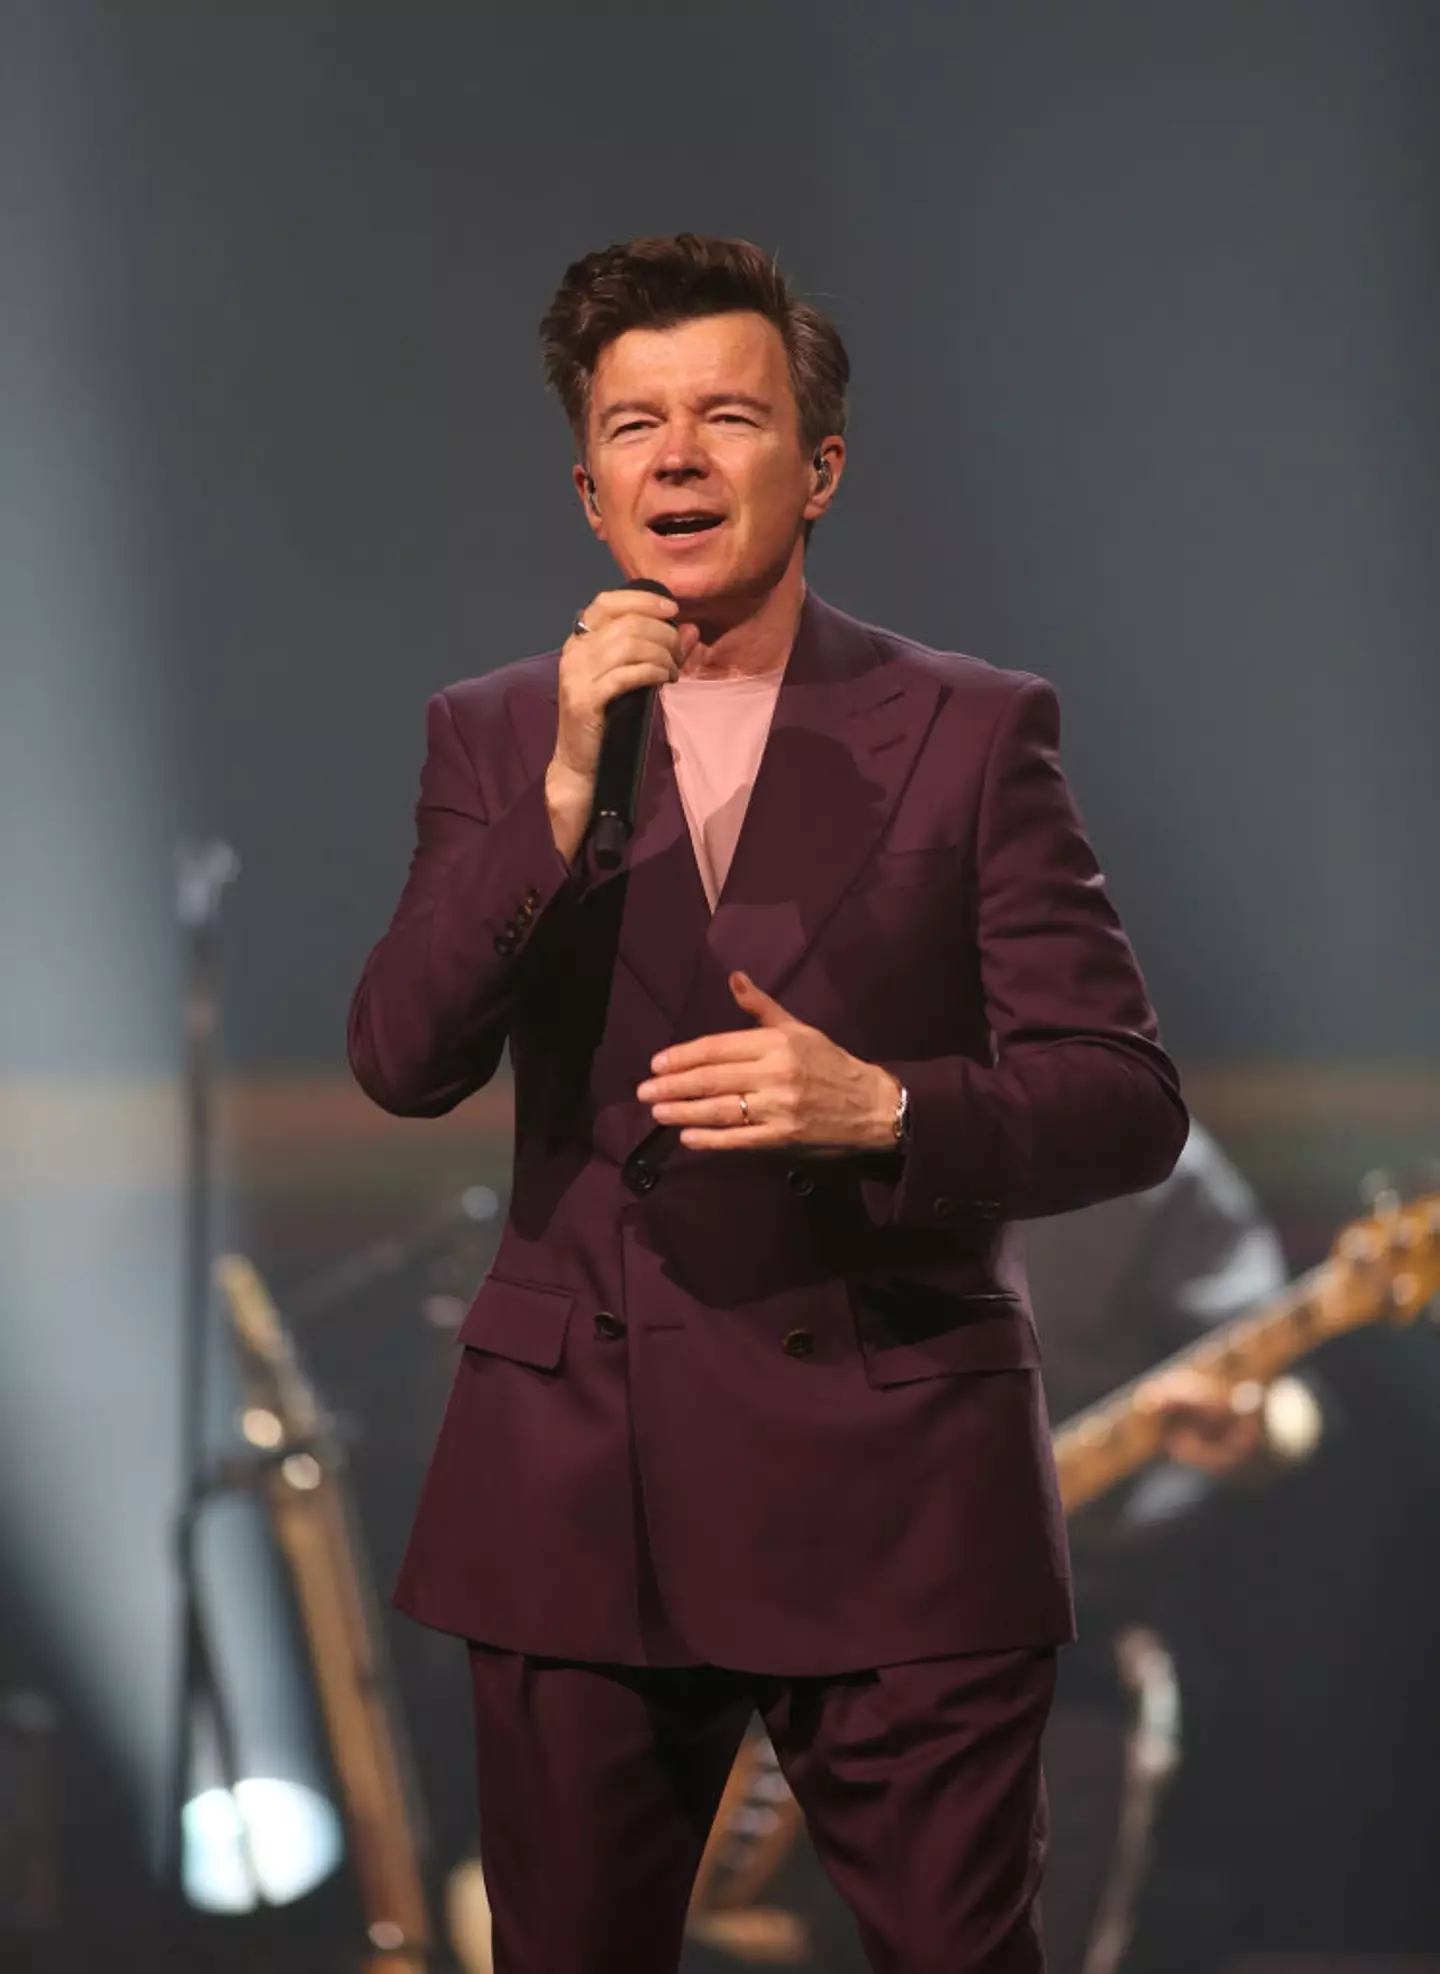 Rick Astley perfomed a test event. (Harry Herd/Redfern)